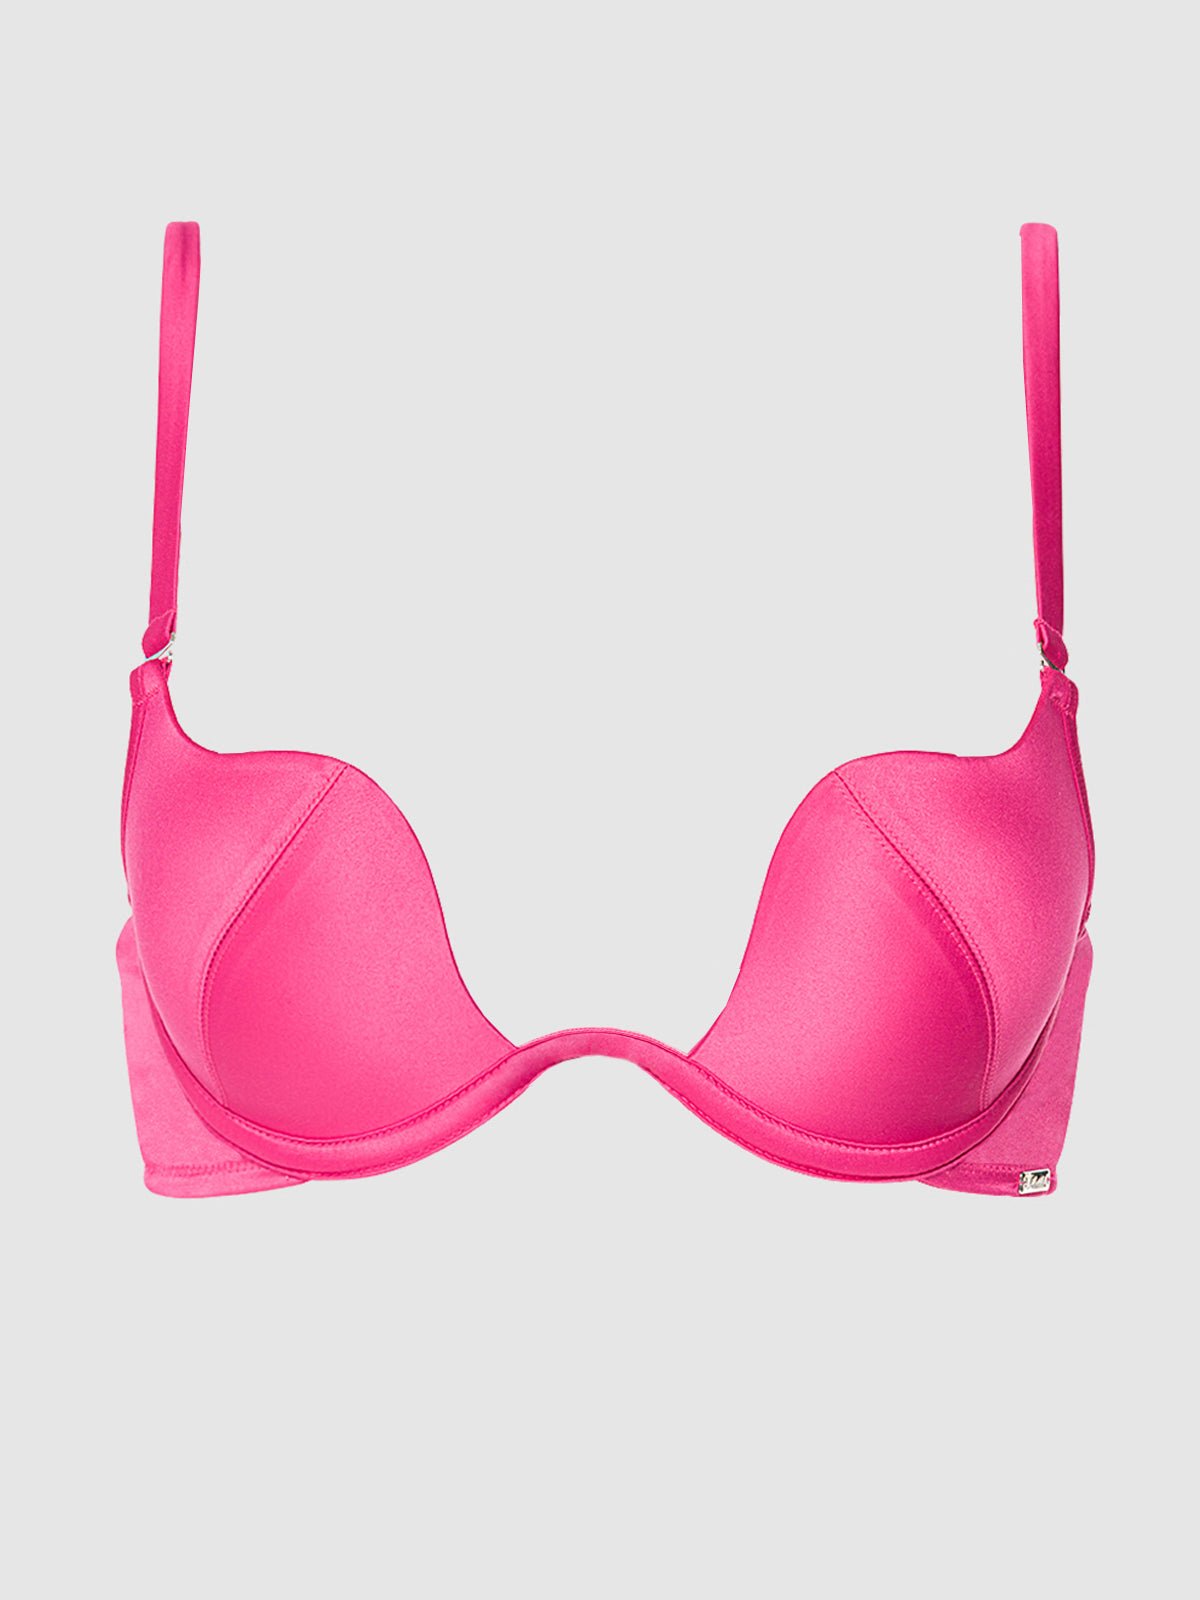 Apt. 9 34B hot pink satin burlesque push up bra Size undefined - $10 - From  Francesca